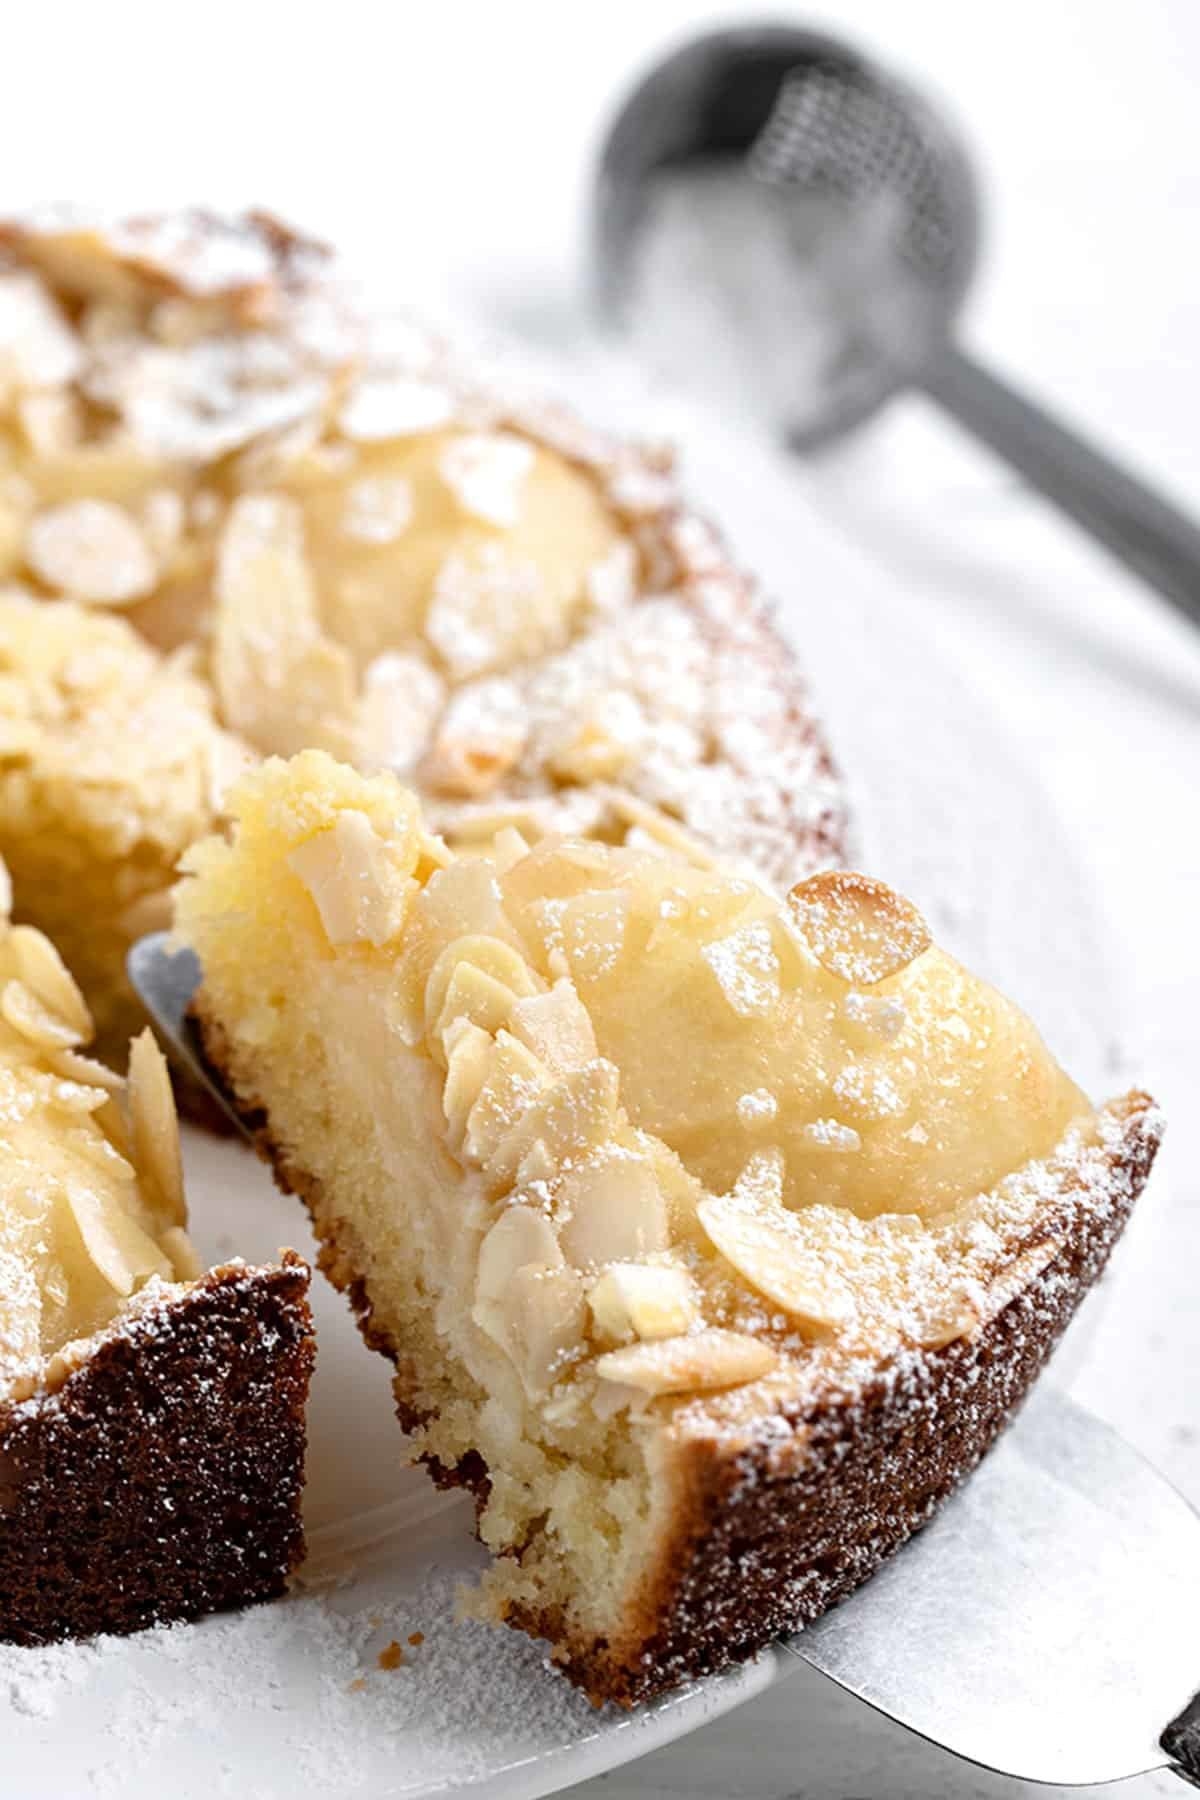 A slice of pear almond cake.